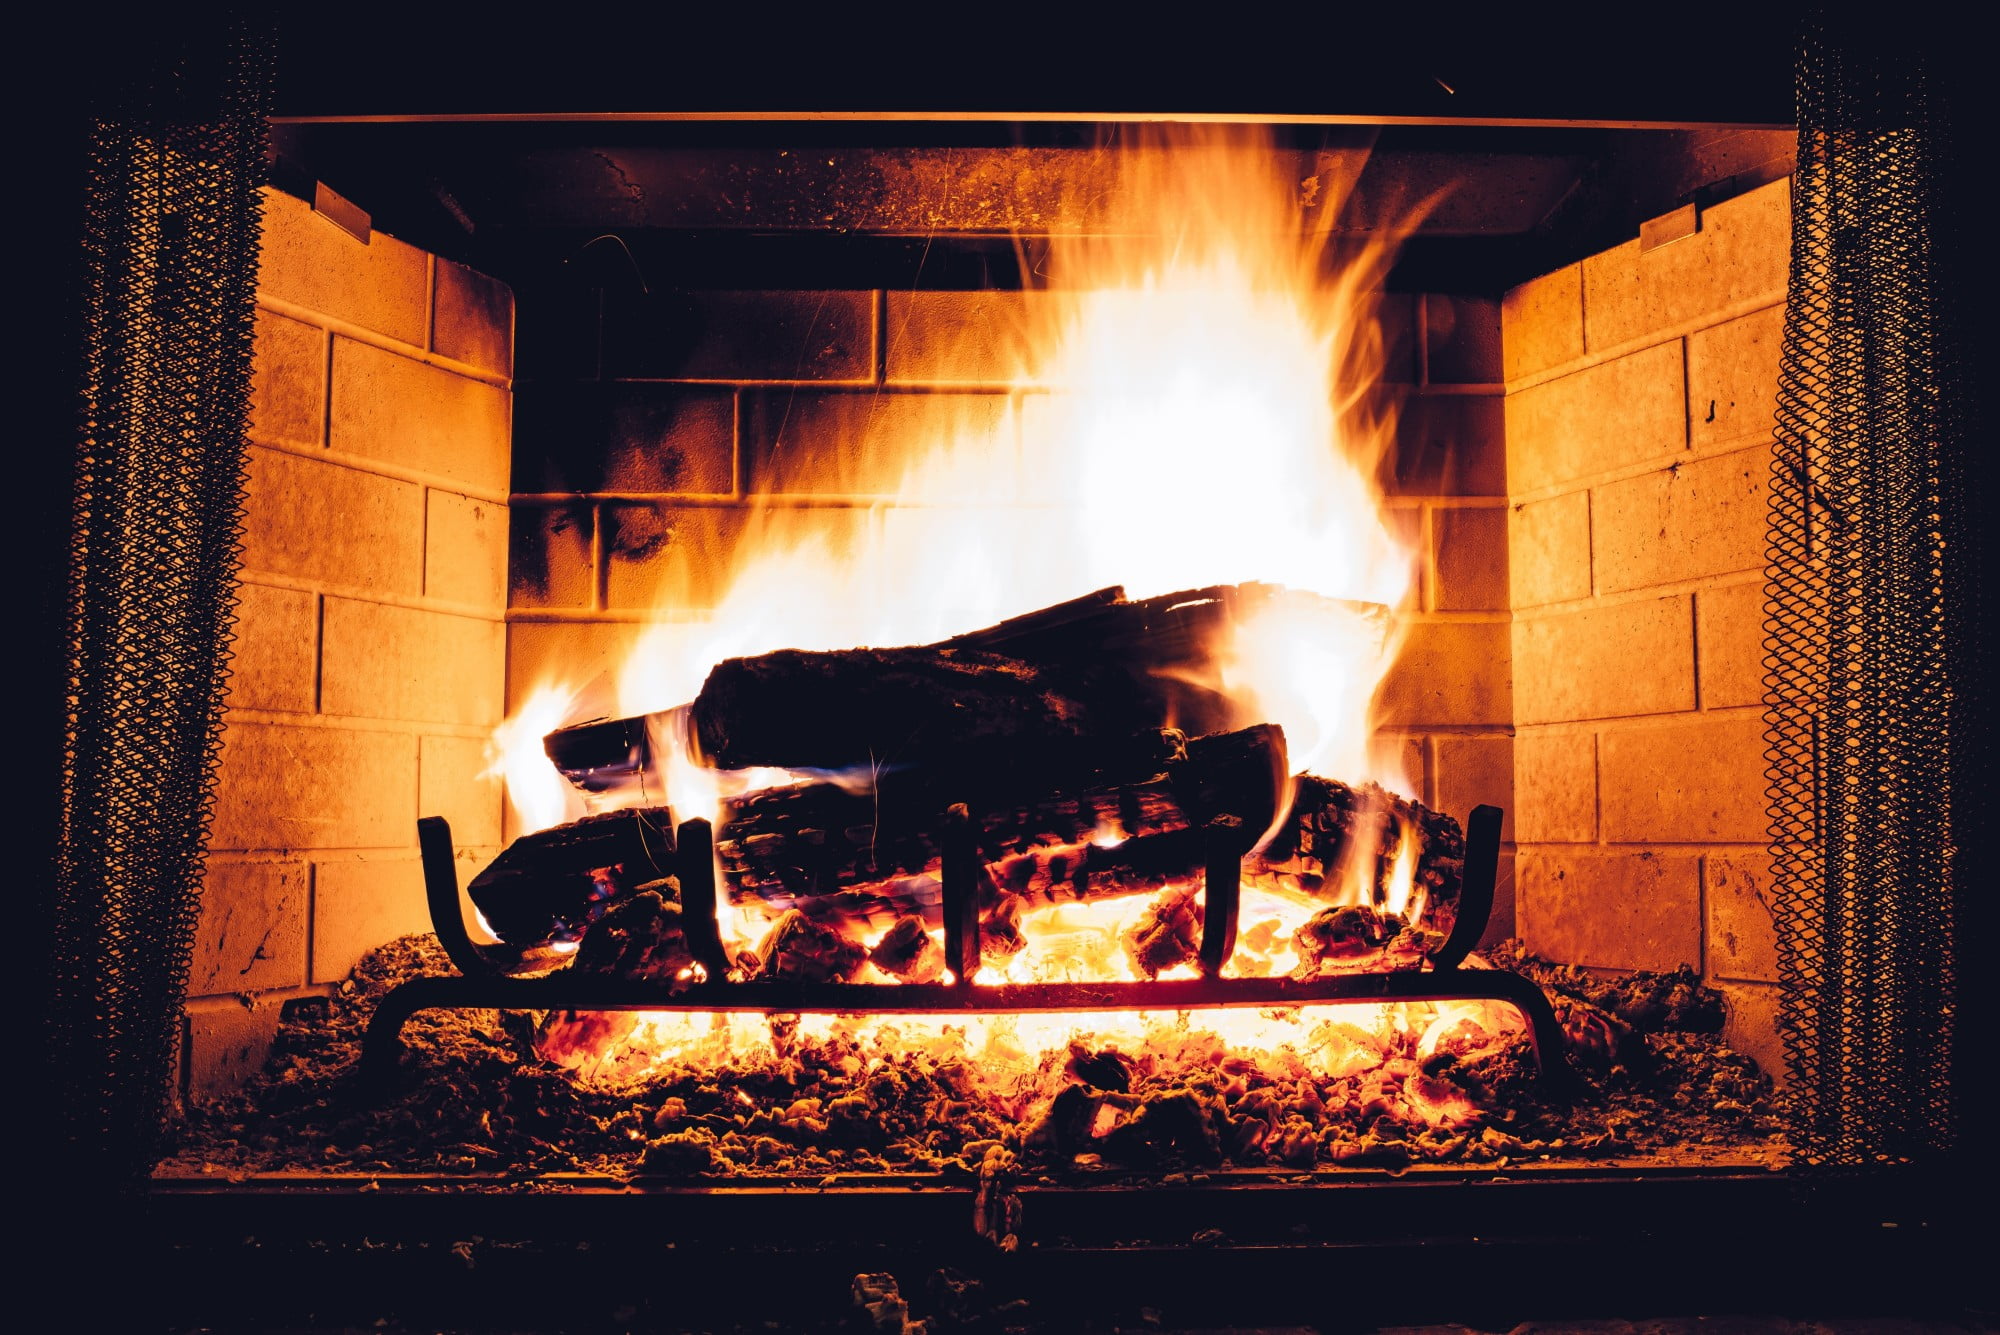 A fire can make a home feel cozy and warm. But you also need to keep safety in mind Here are five reasons to have a fireplace safety screen or door.